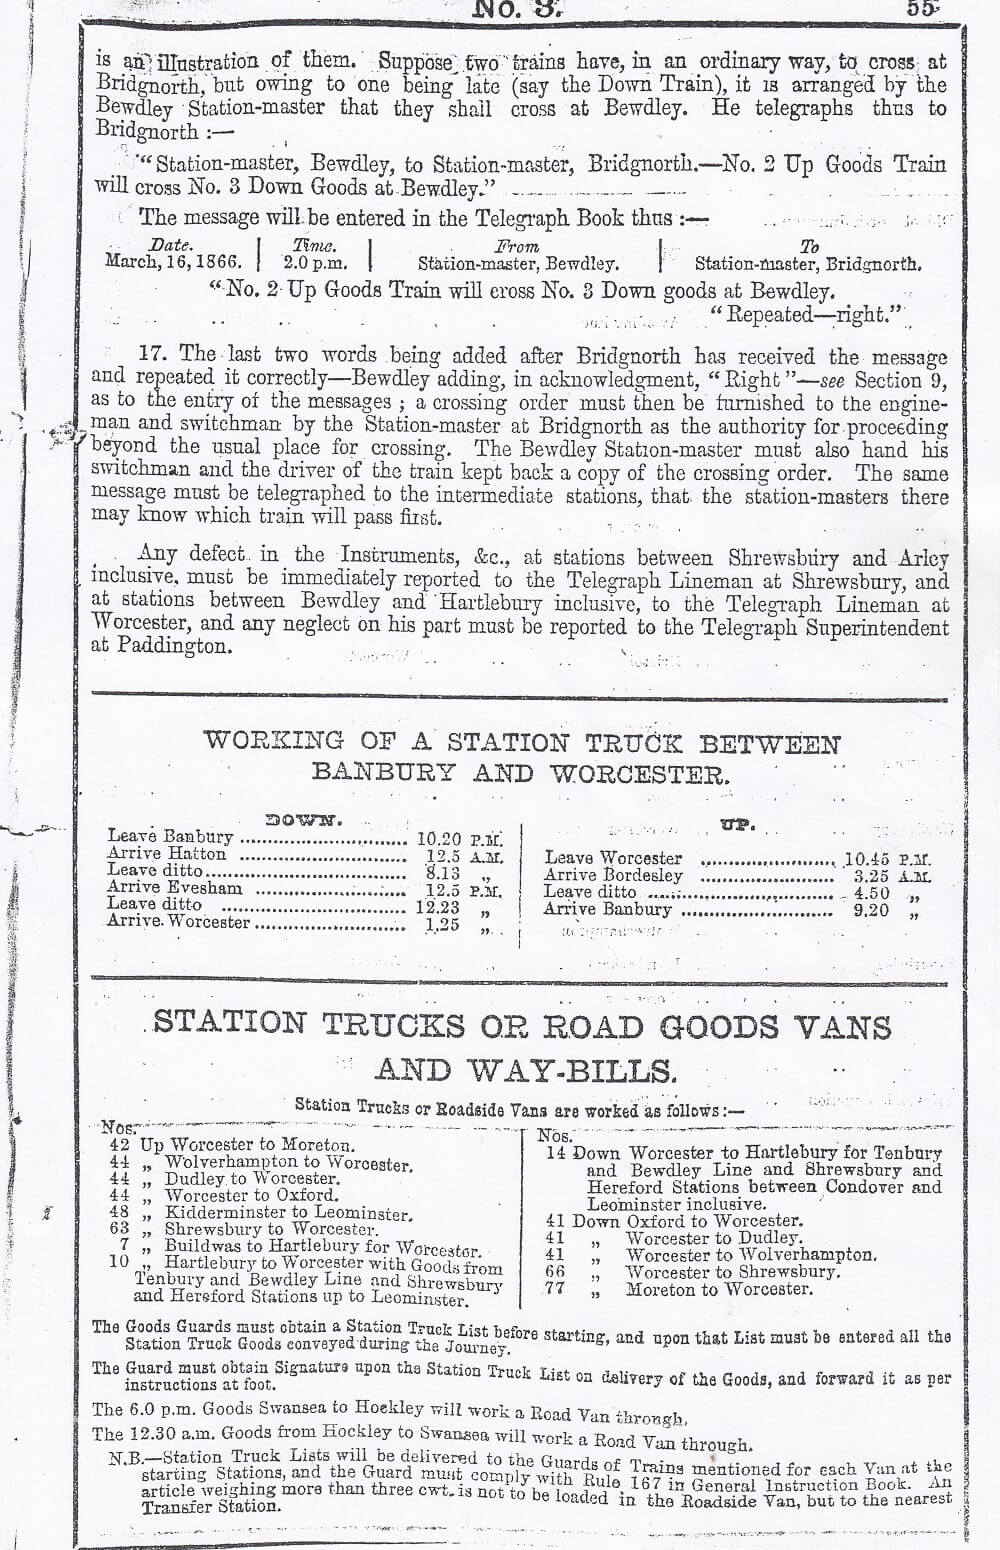 1876 timetable page 55.jpg